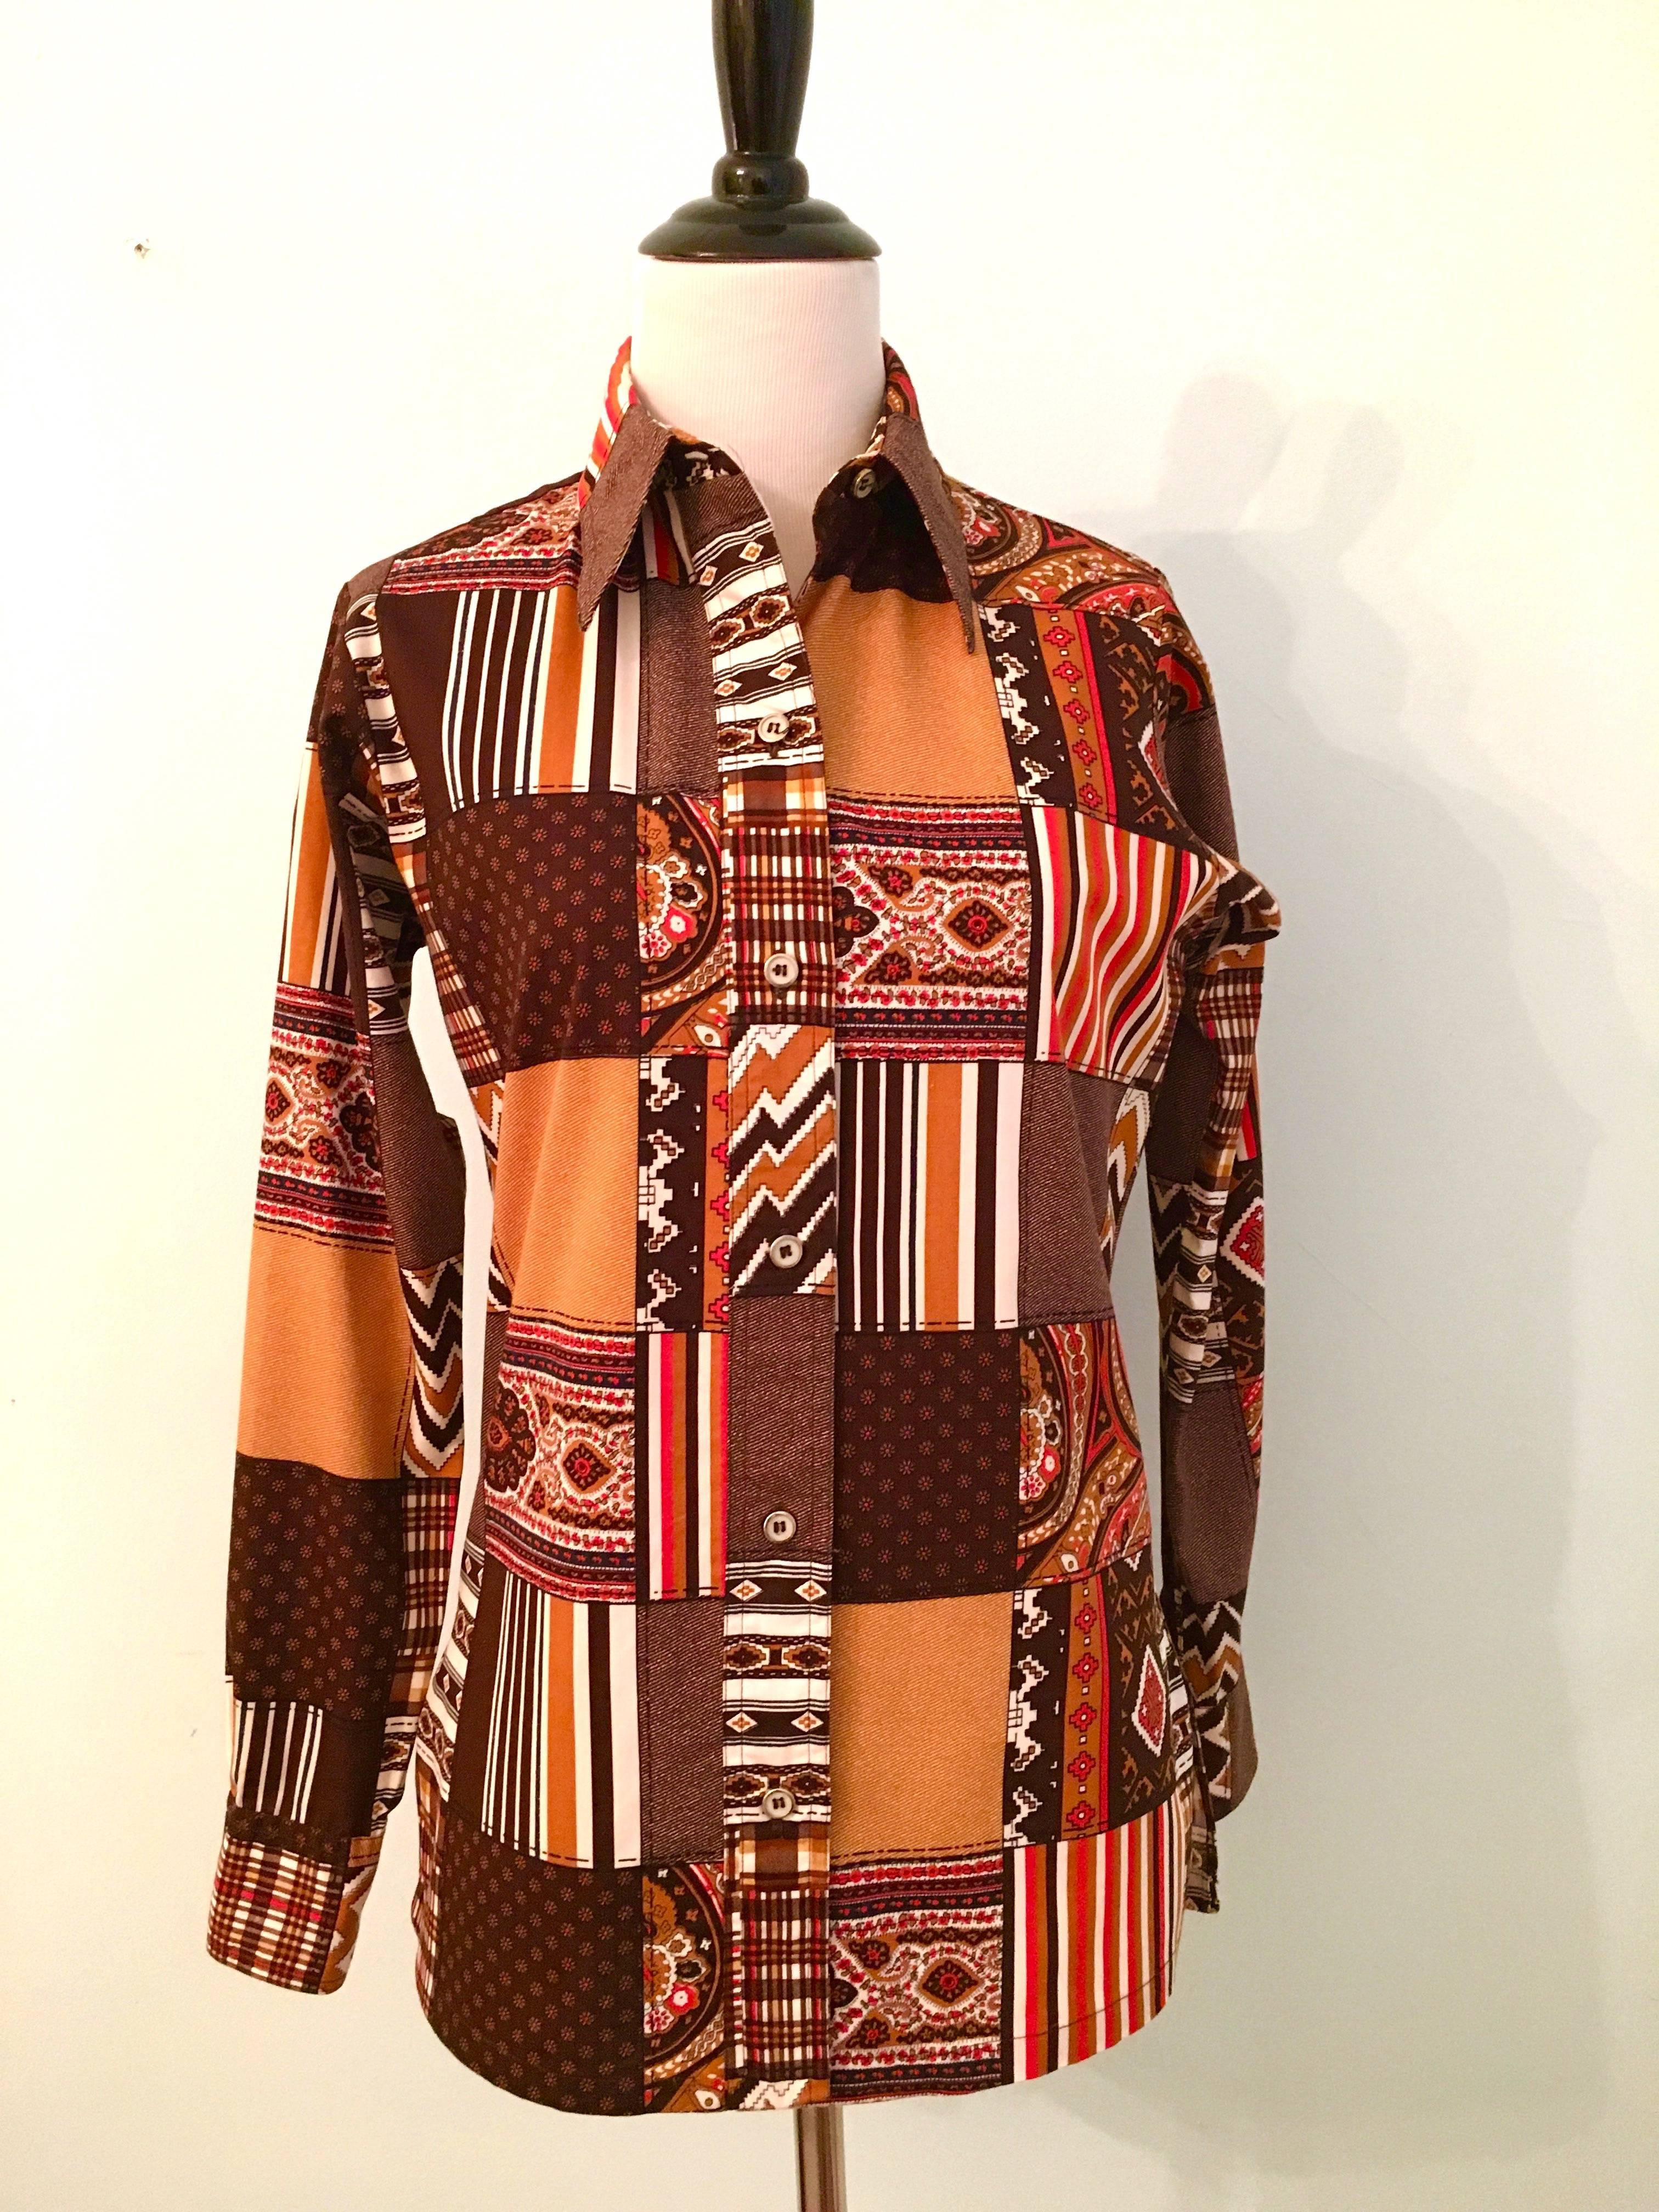 Brown Christian Dior Patchwork Blouse 1970s I. Magnin & Co. For Sale